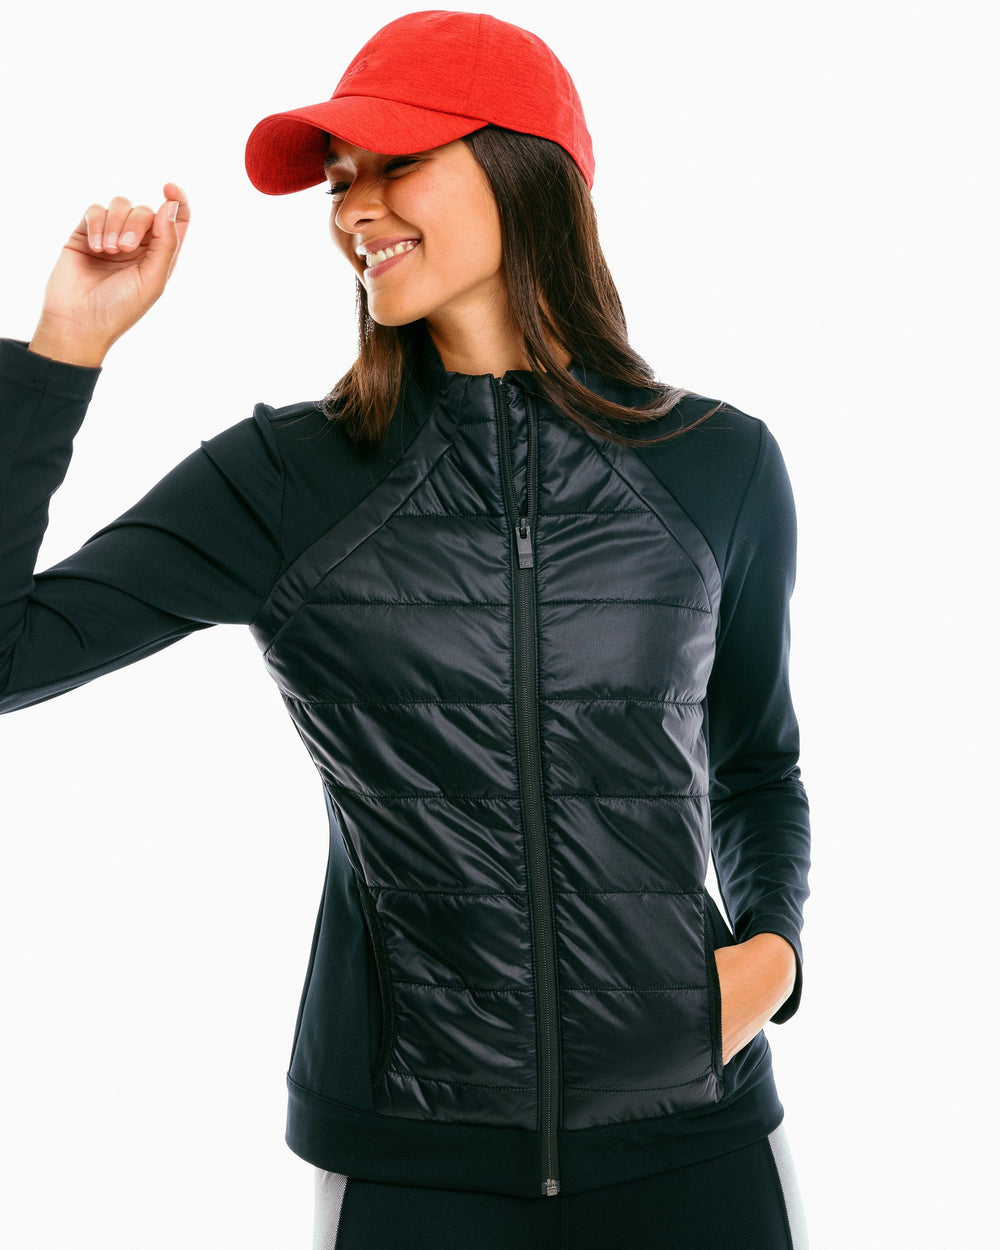 The front of the Women's Josette Mixed Media Full Zip Athletic Jacket - Black